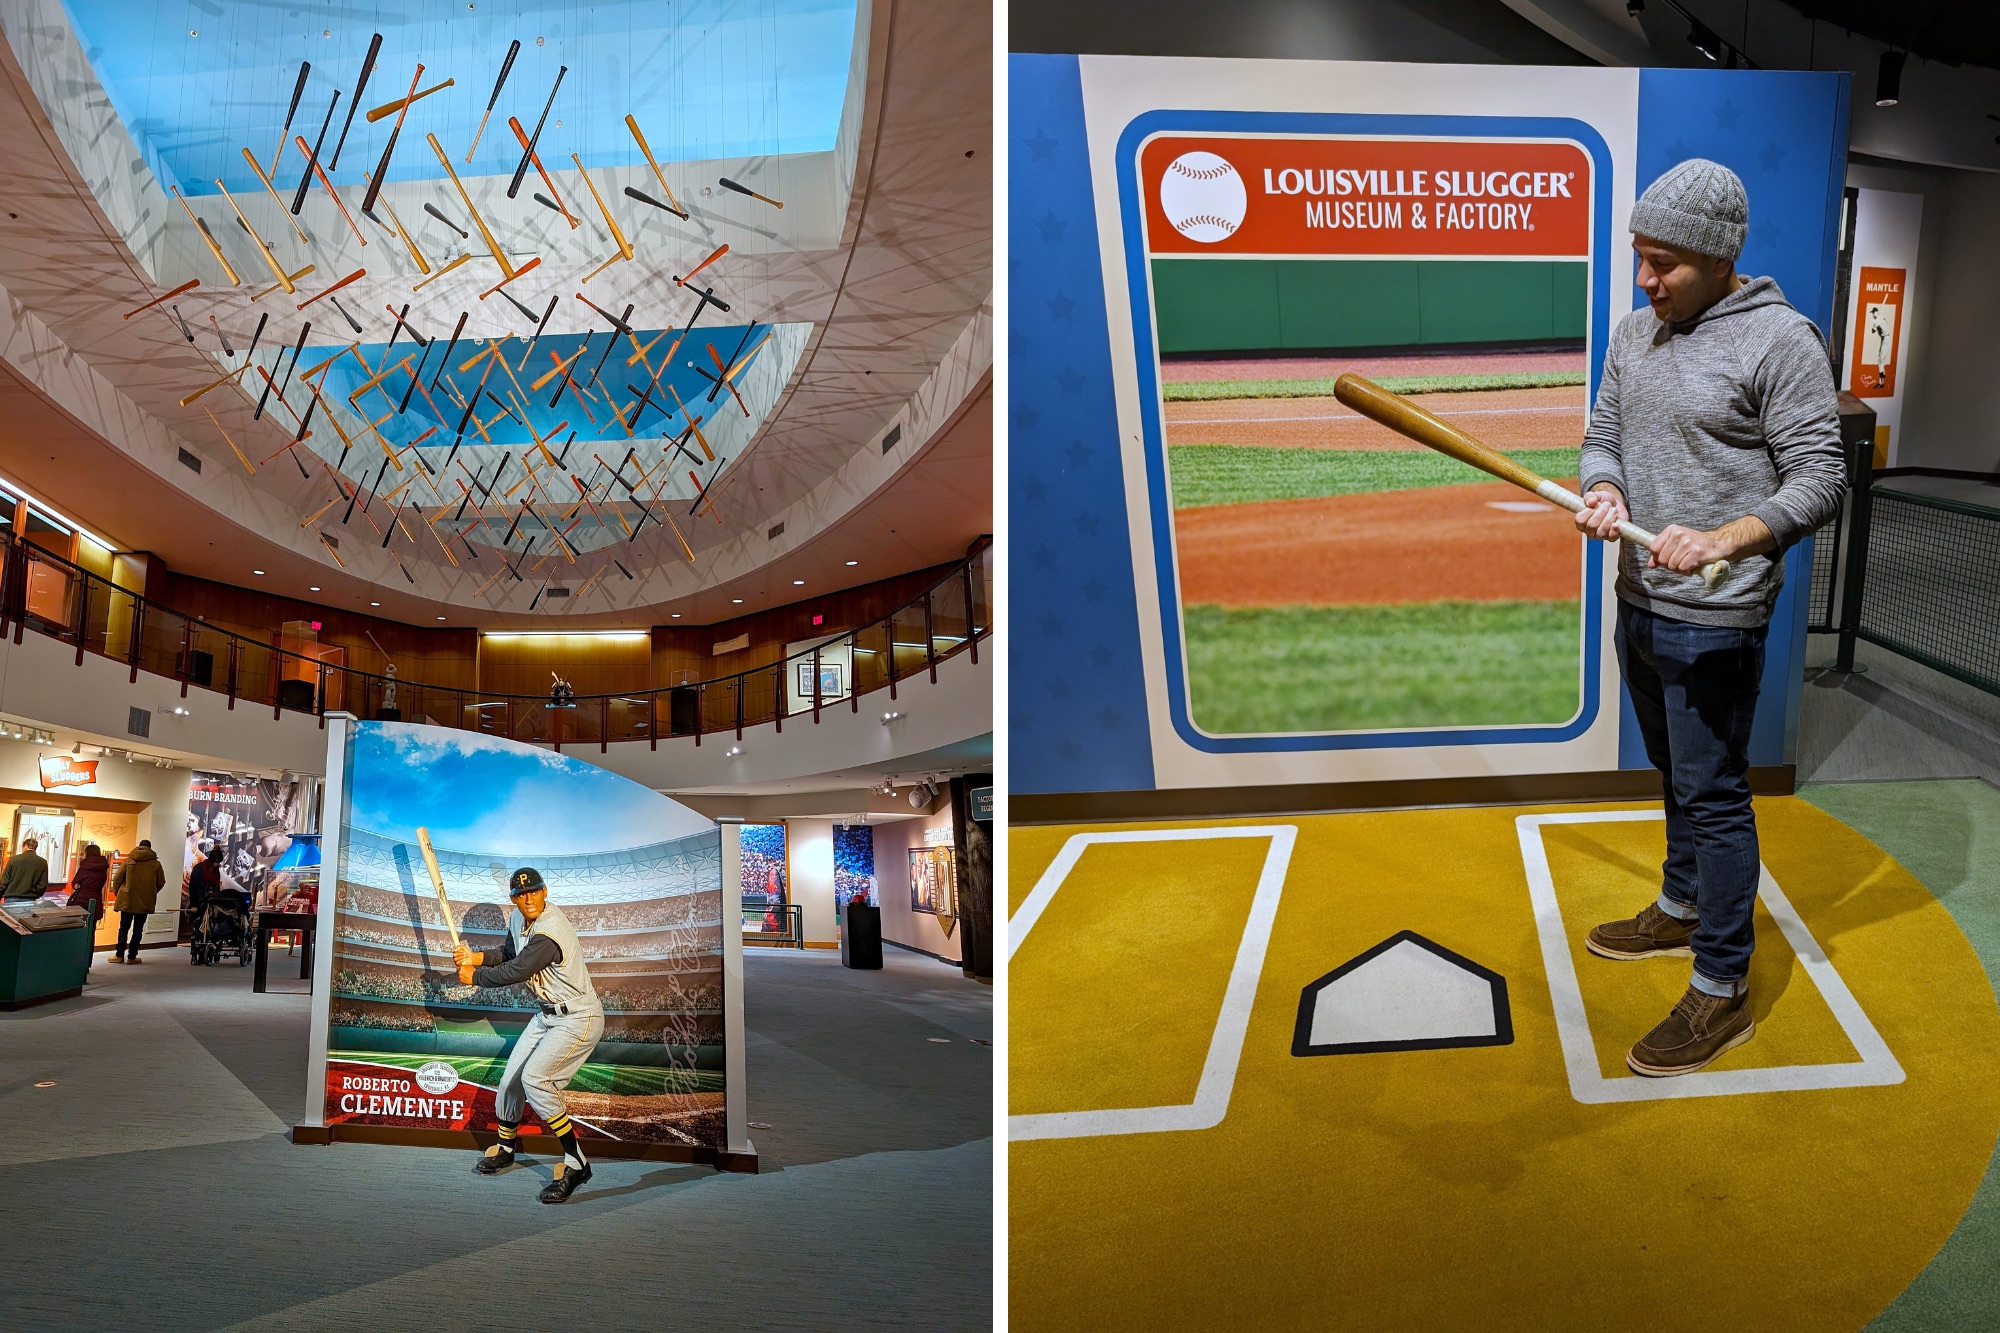 A photo of the Louisville Slugger Museum and Michael holding Babe Ruth's bat